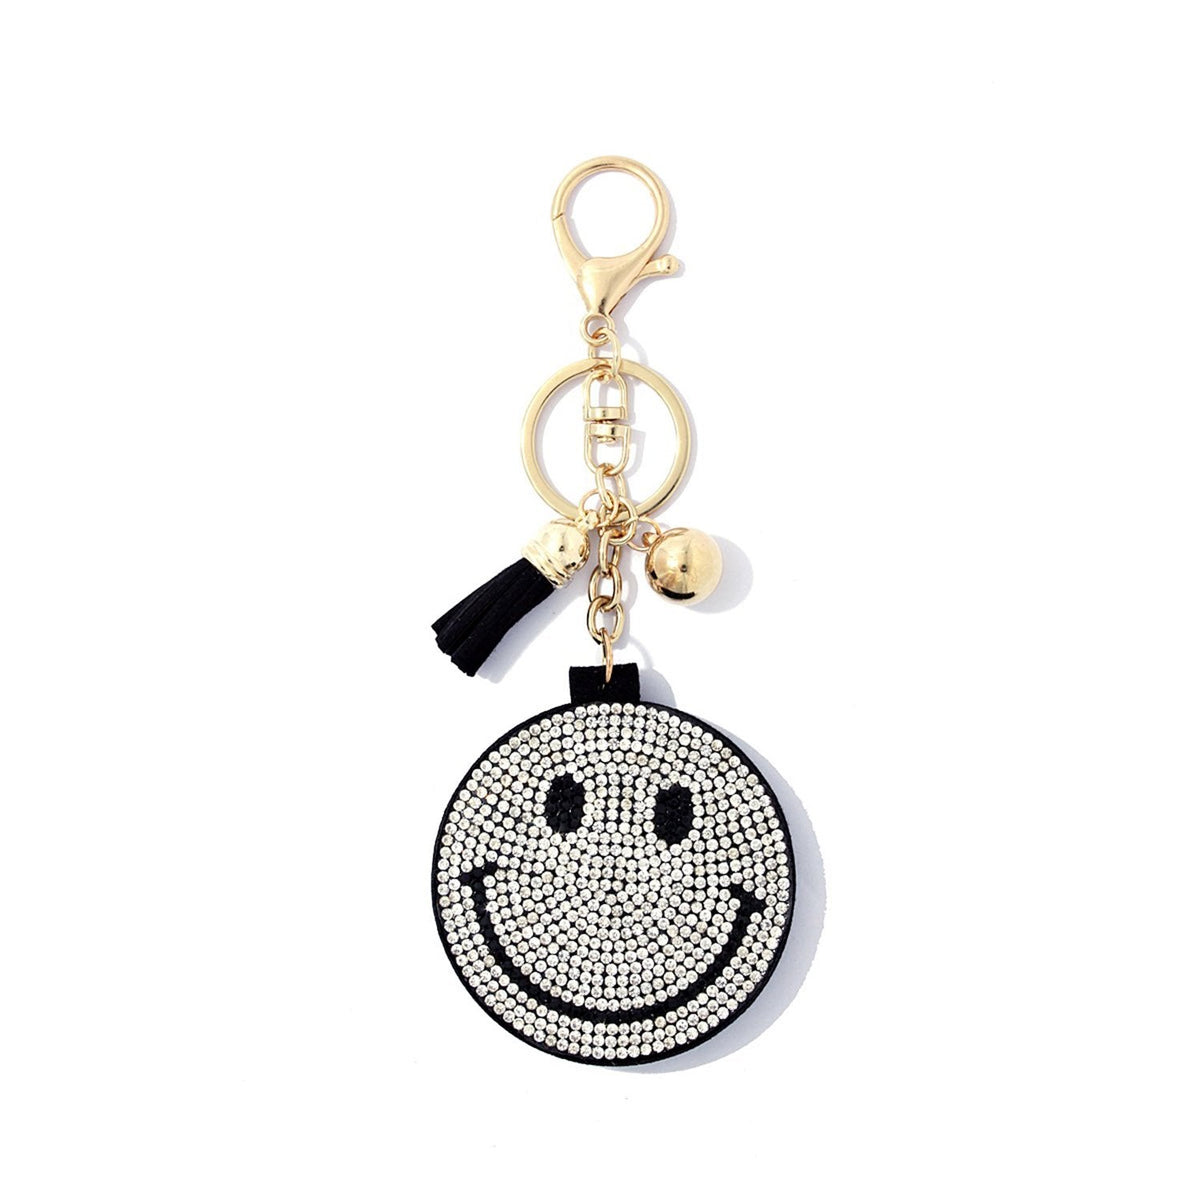 Smiley Face Key Chain with Mirror - Key Chains